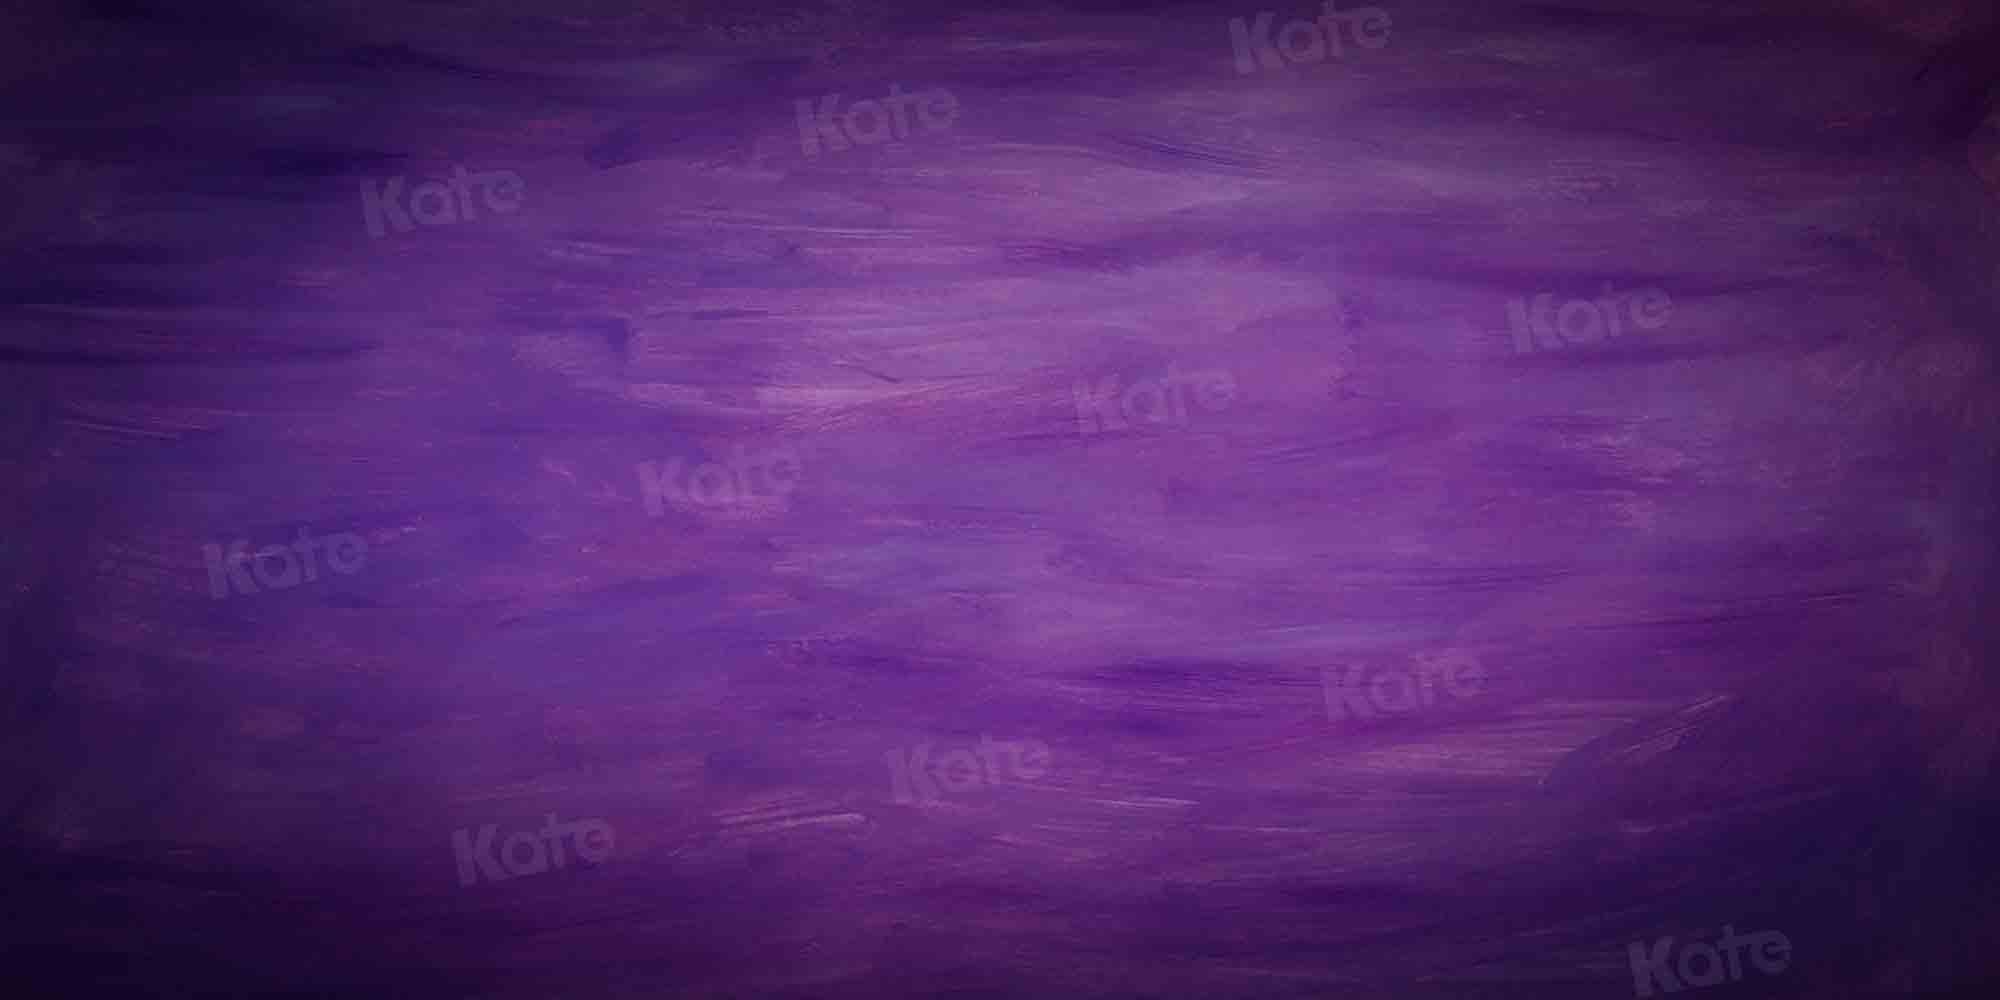 Kate Abstract Purple Backdrop Designed by Kate Image